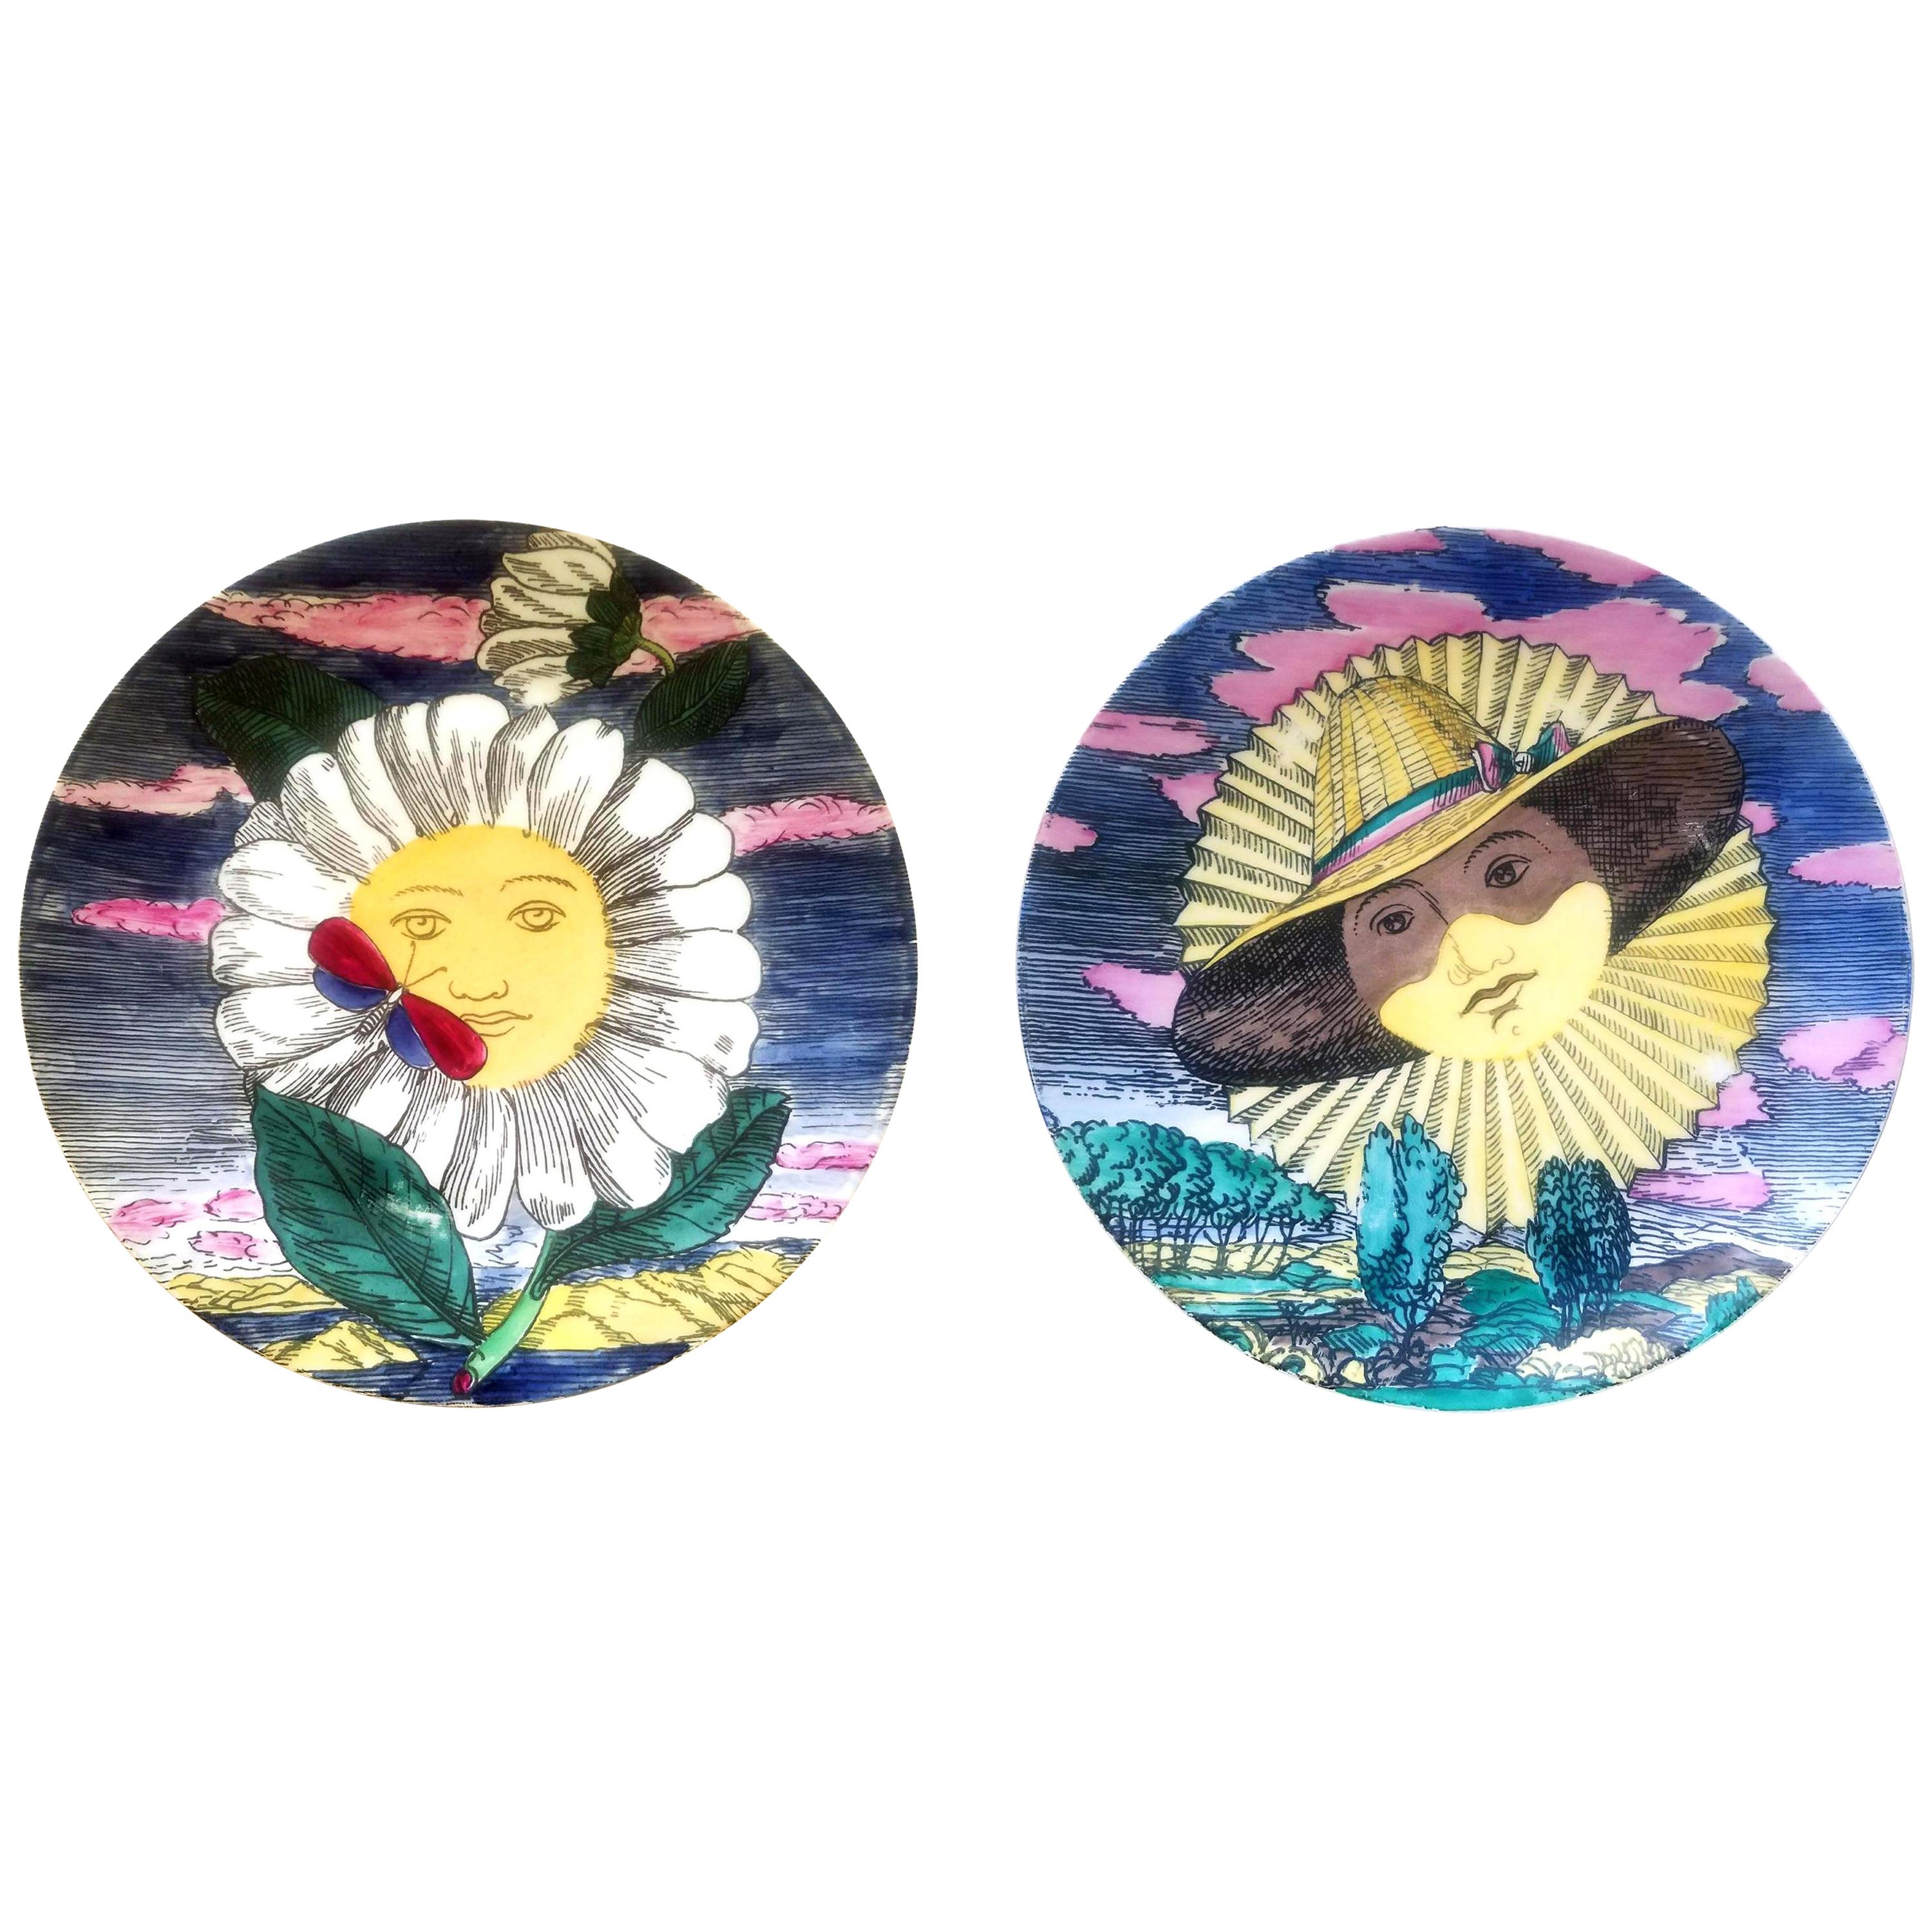 Piero Fornasetti Porcelain Mesi and Soli Pair of Plates 12 Suns 12 Months, 1955 For Sale